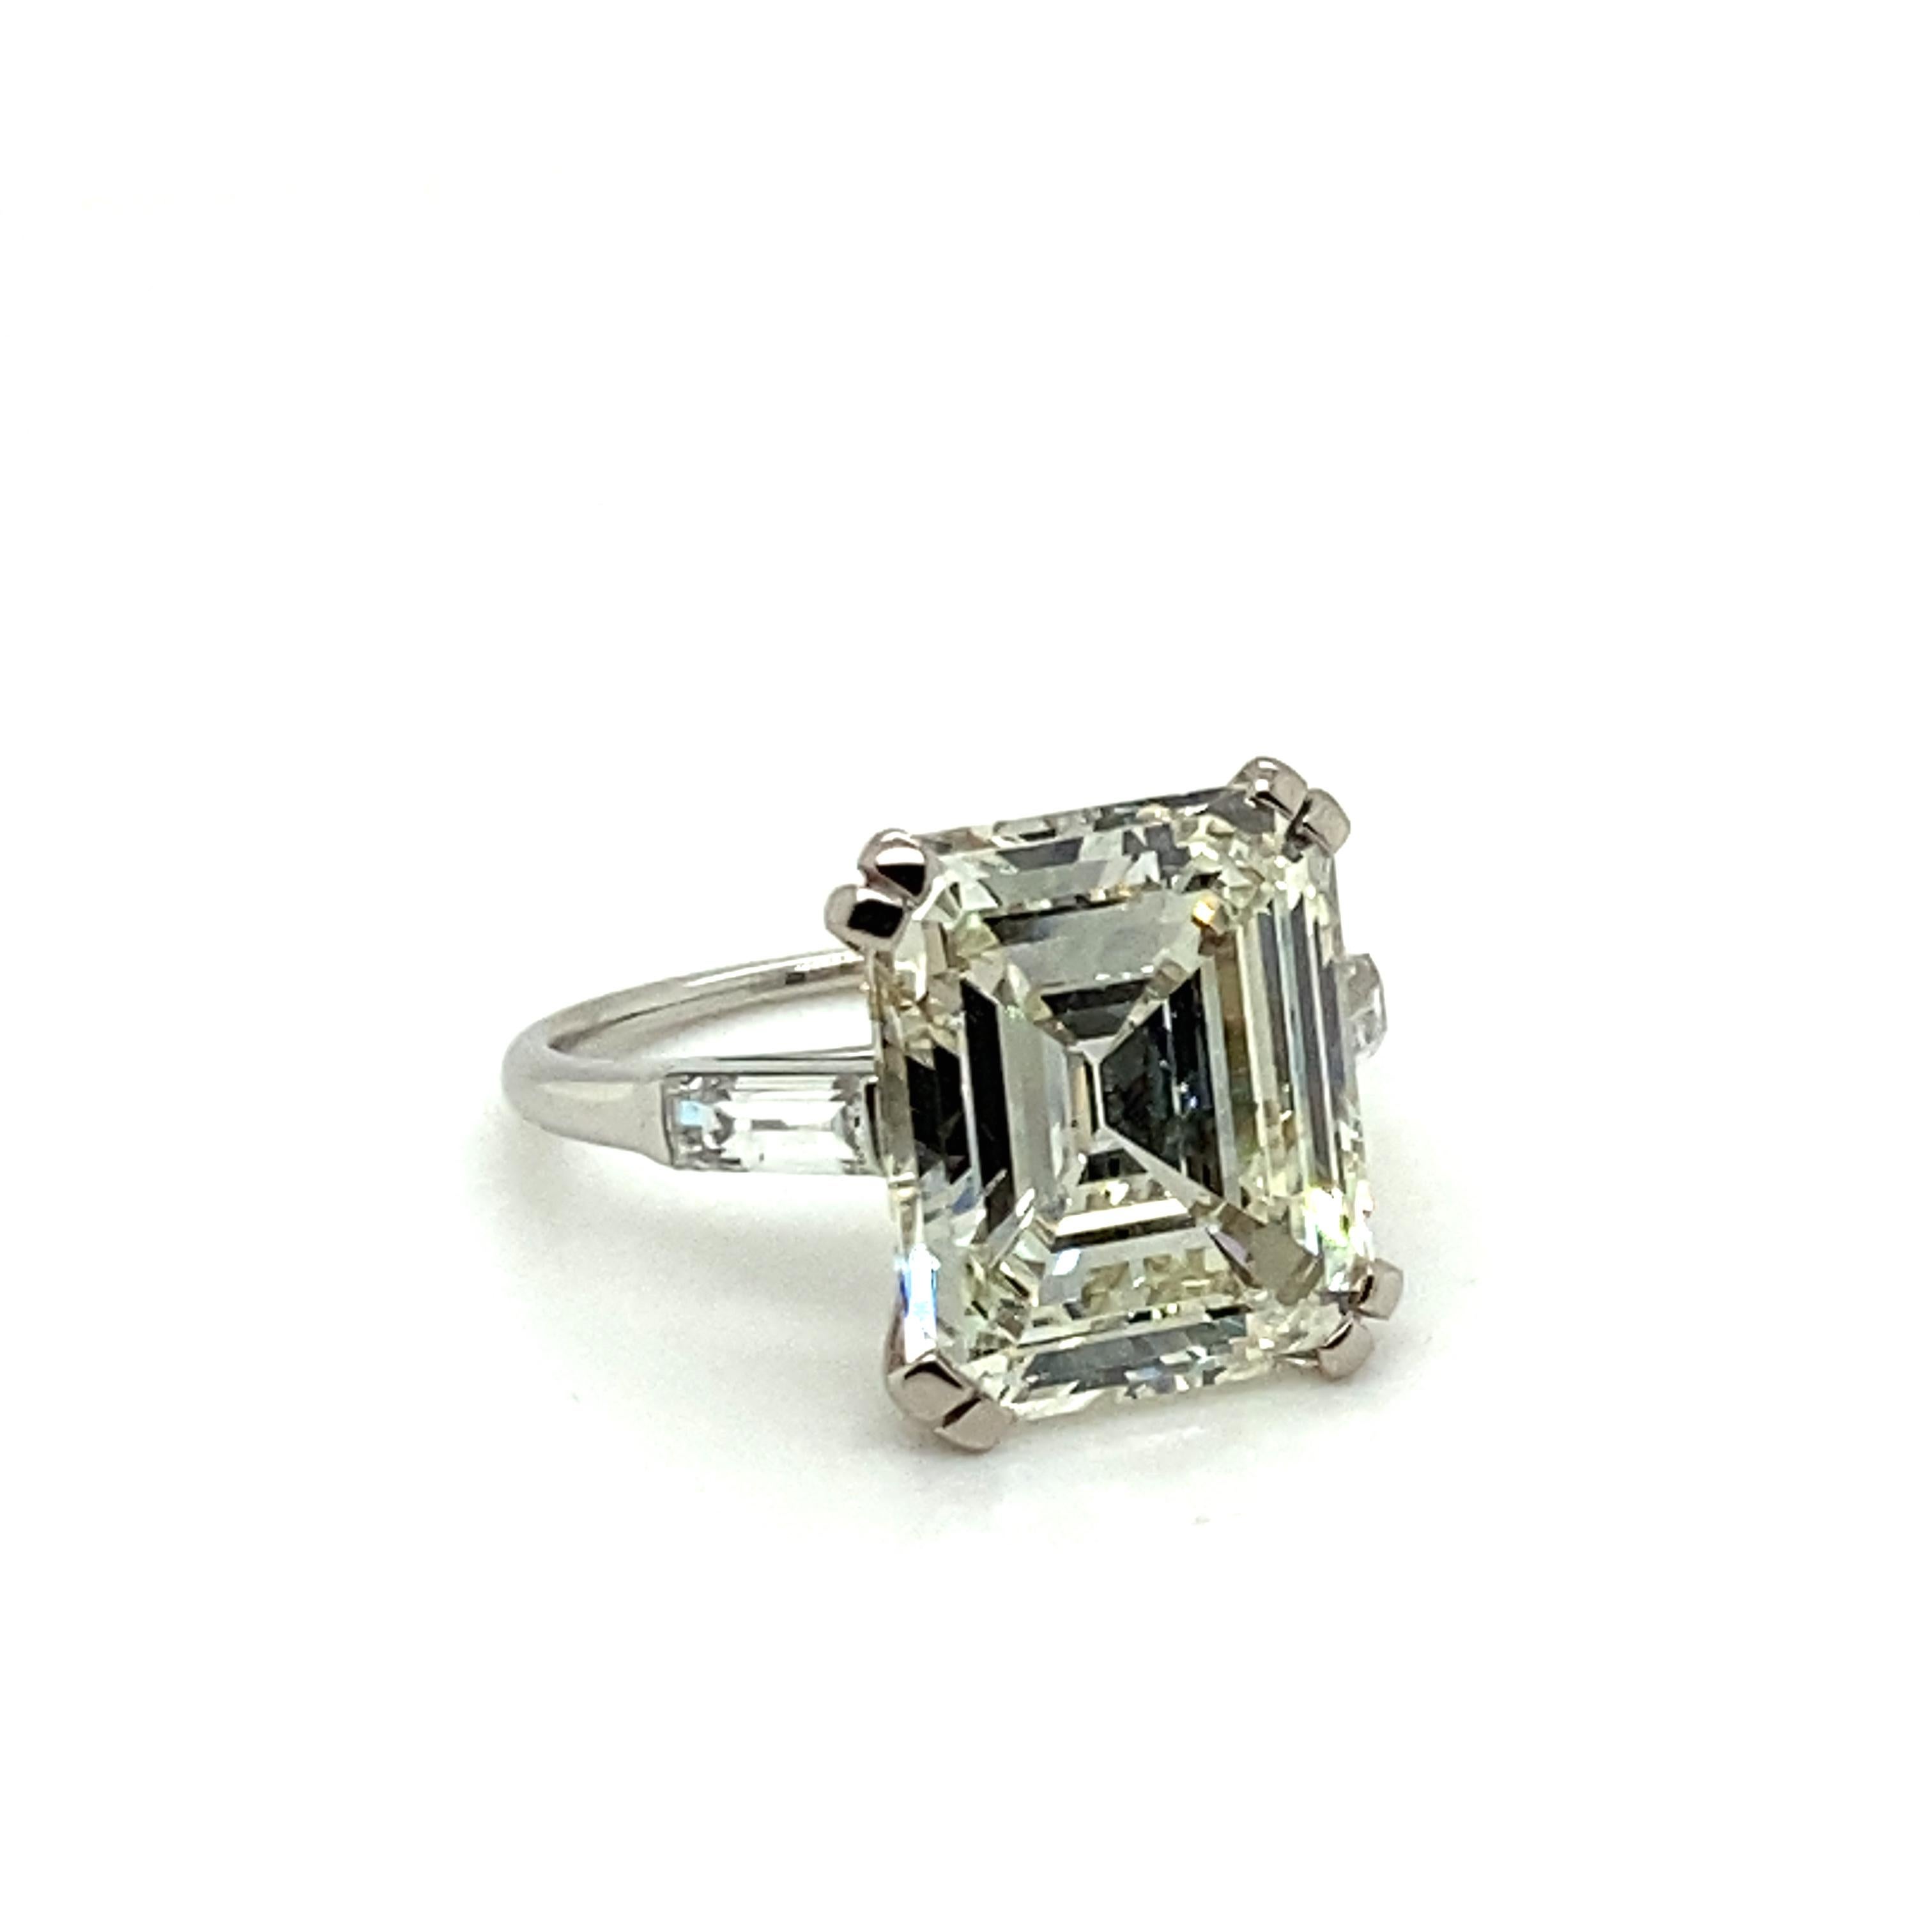 This fabulous diamond ring in platinum 950 dazzles with a 7.34 ct emerald-cut diamond of K colour and vs2 clarity. Elegantly and timelessly set in four double prongs and accented with two diamond baguettes with a total weight of approximately 0.40